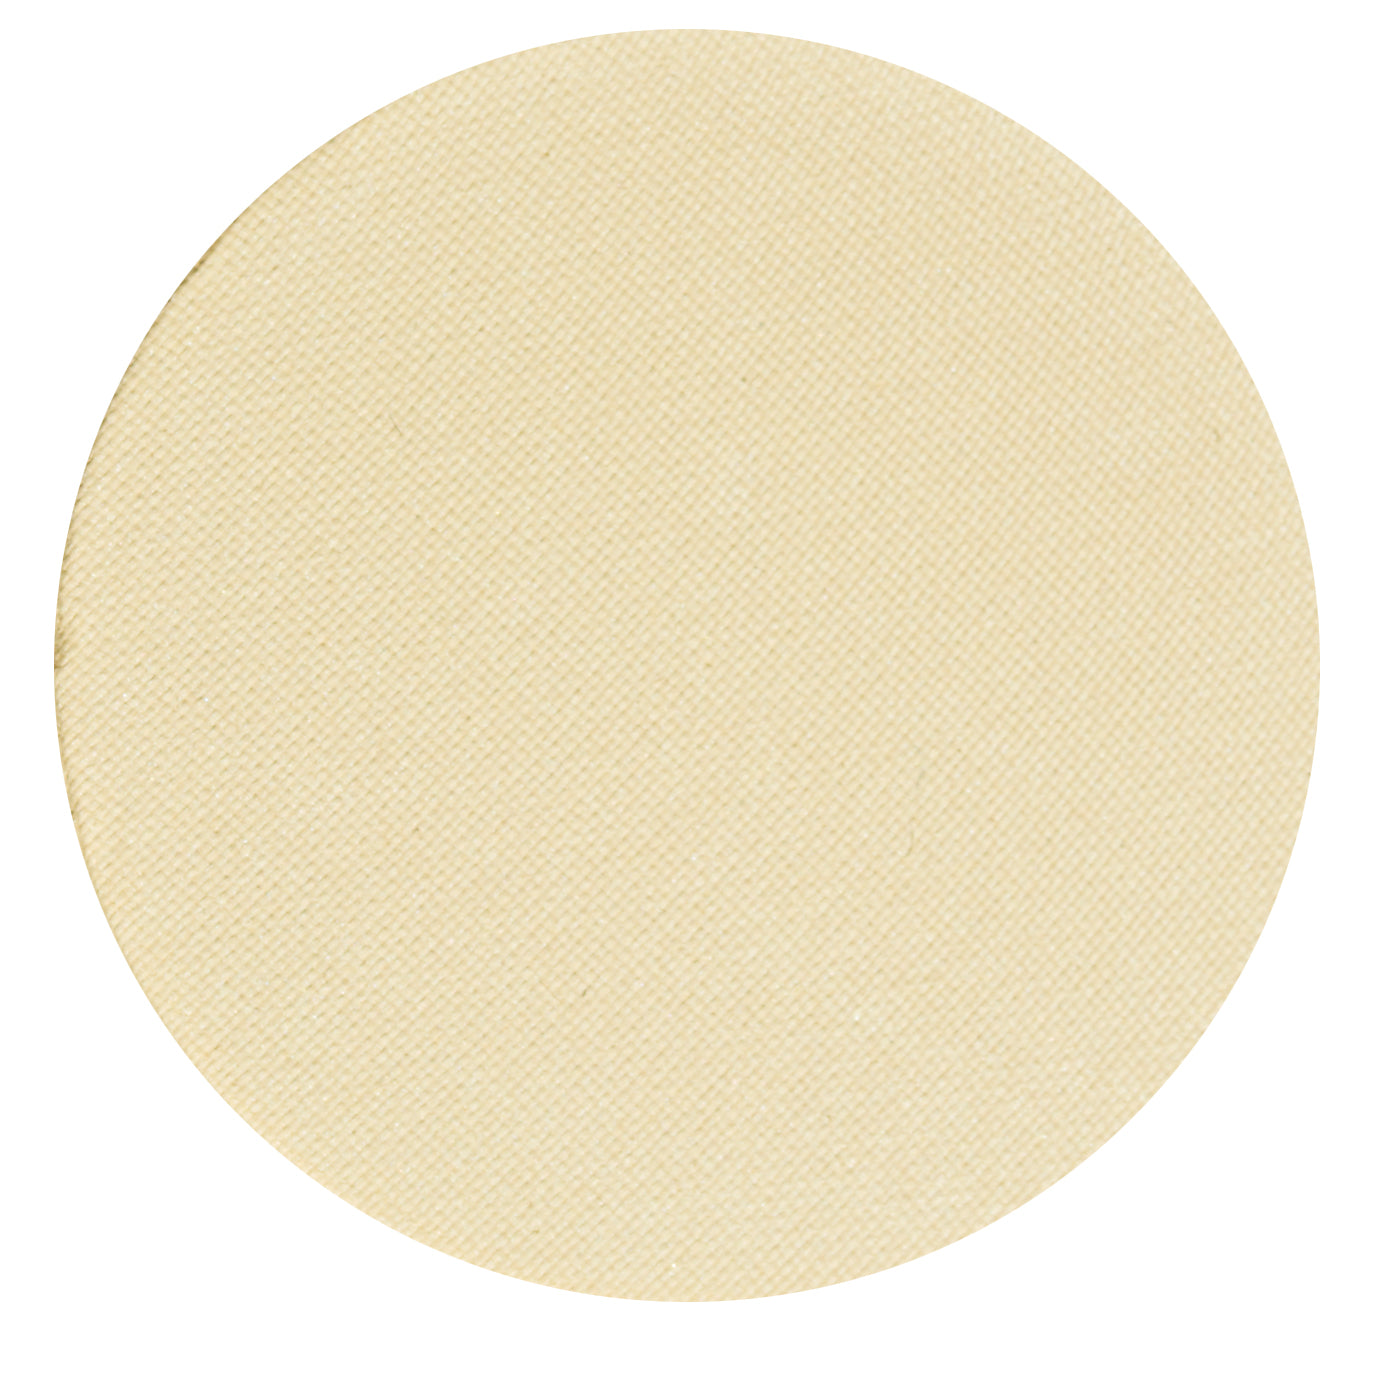 Close-up swatch of single pan Odylique organic eyeshadow in shade Sand, a versatile pale cream with soft shimmer.